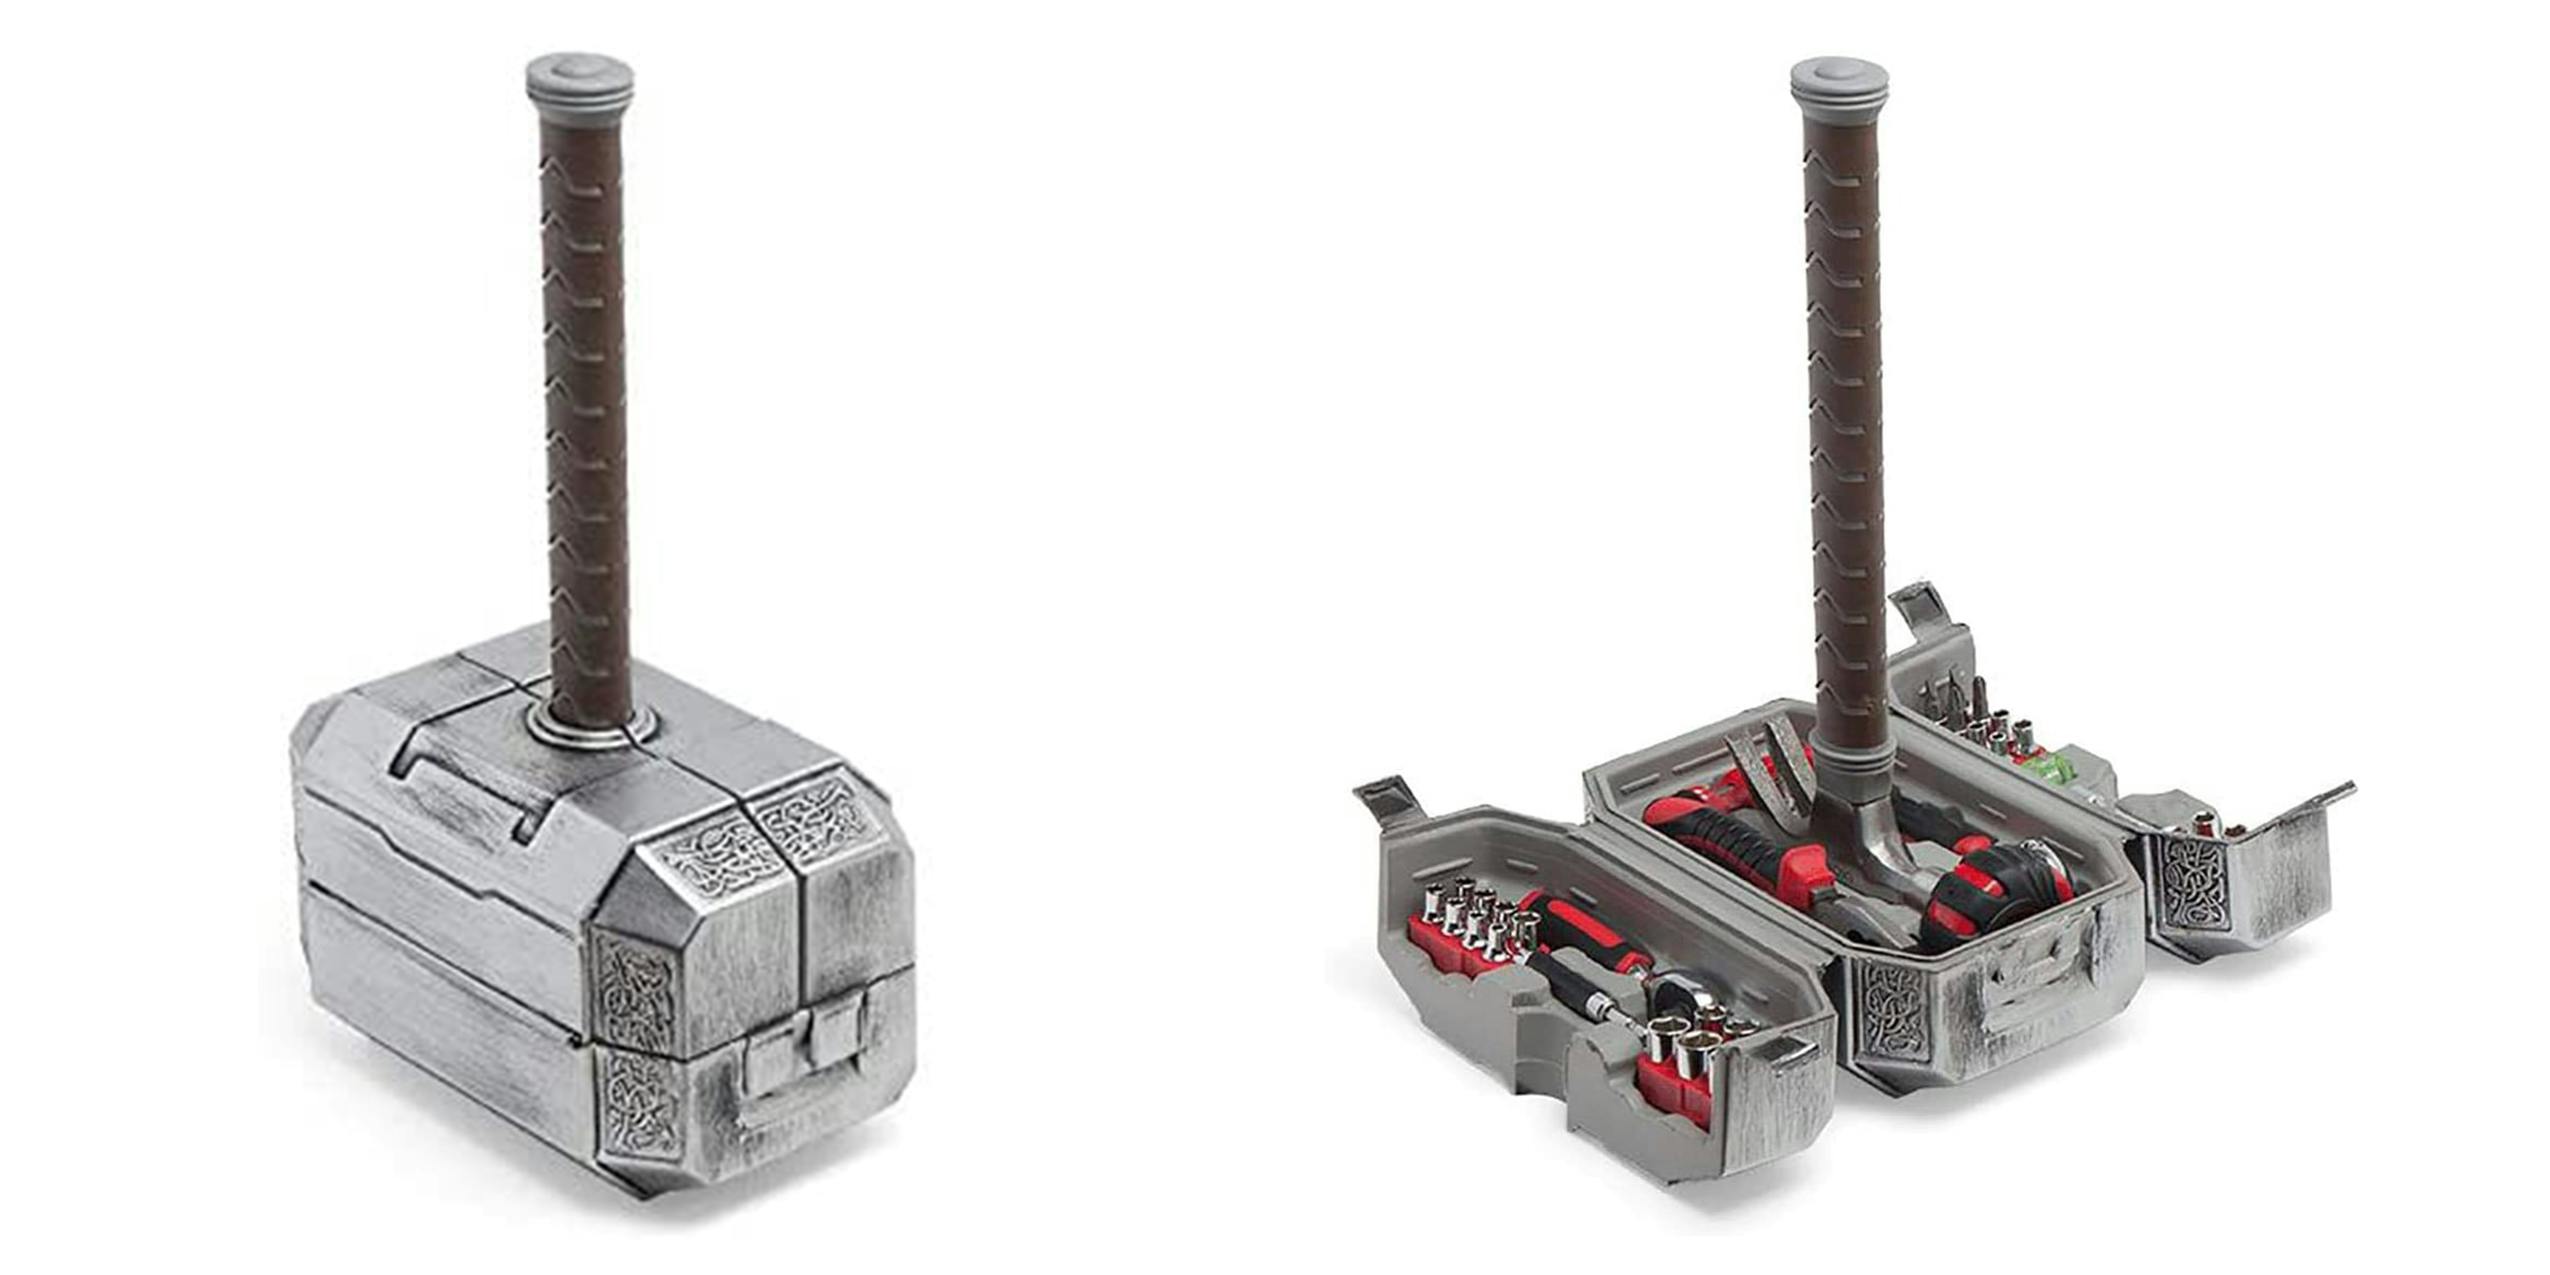 A Thor hammer tool set opened and closed.